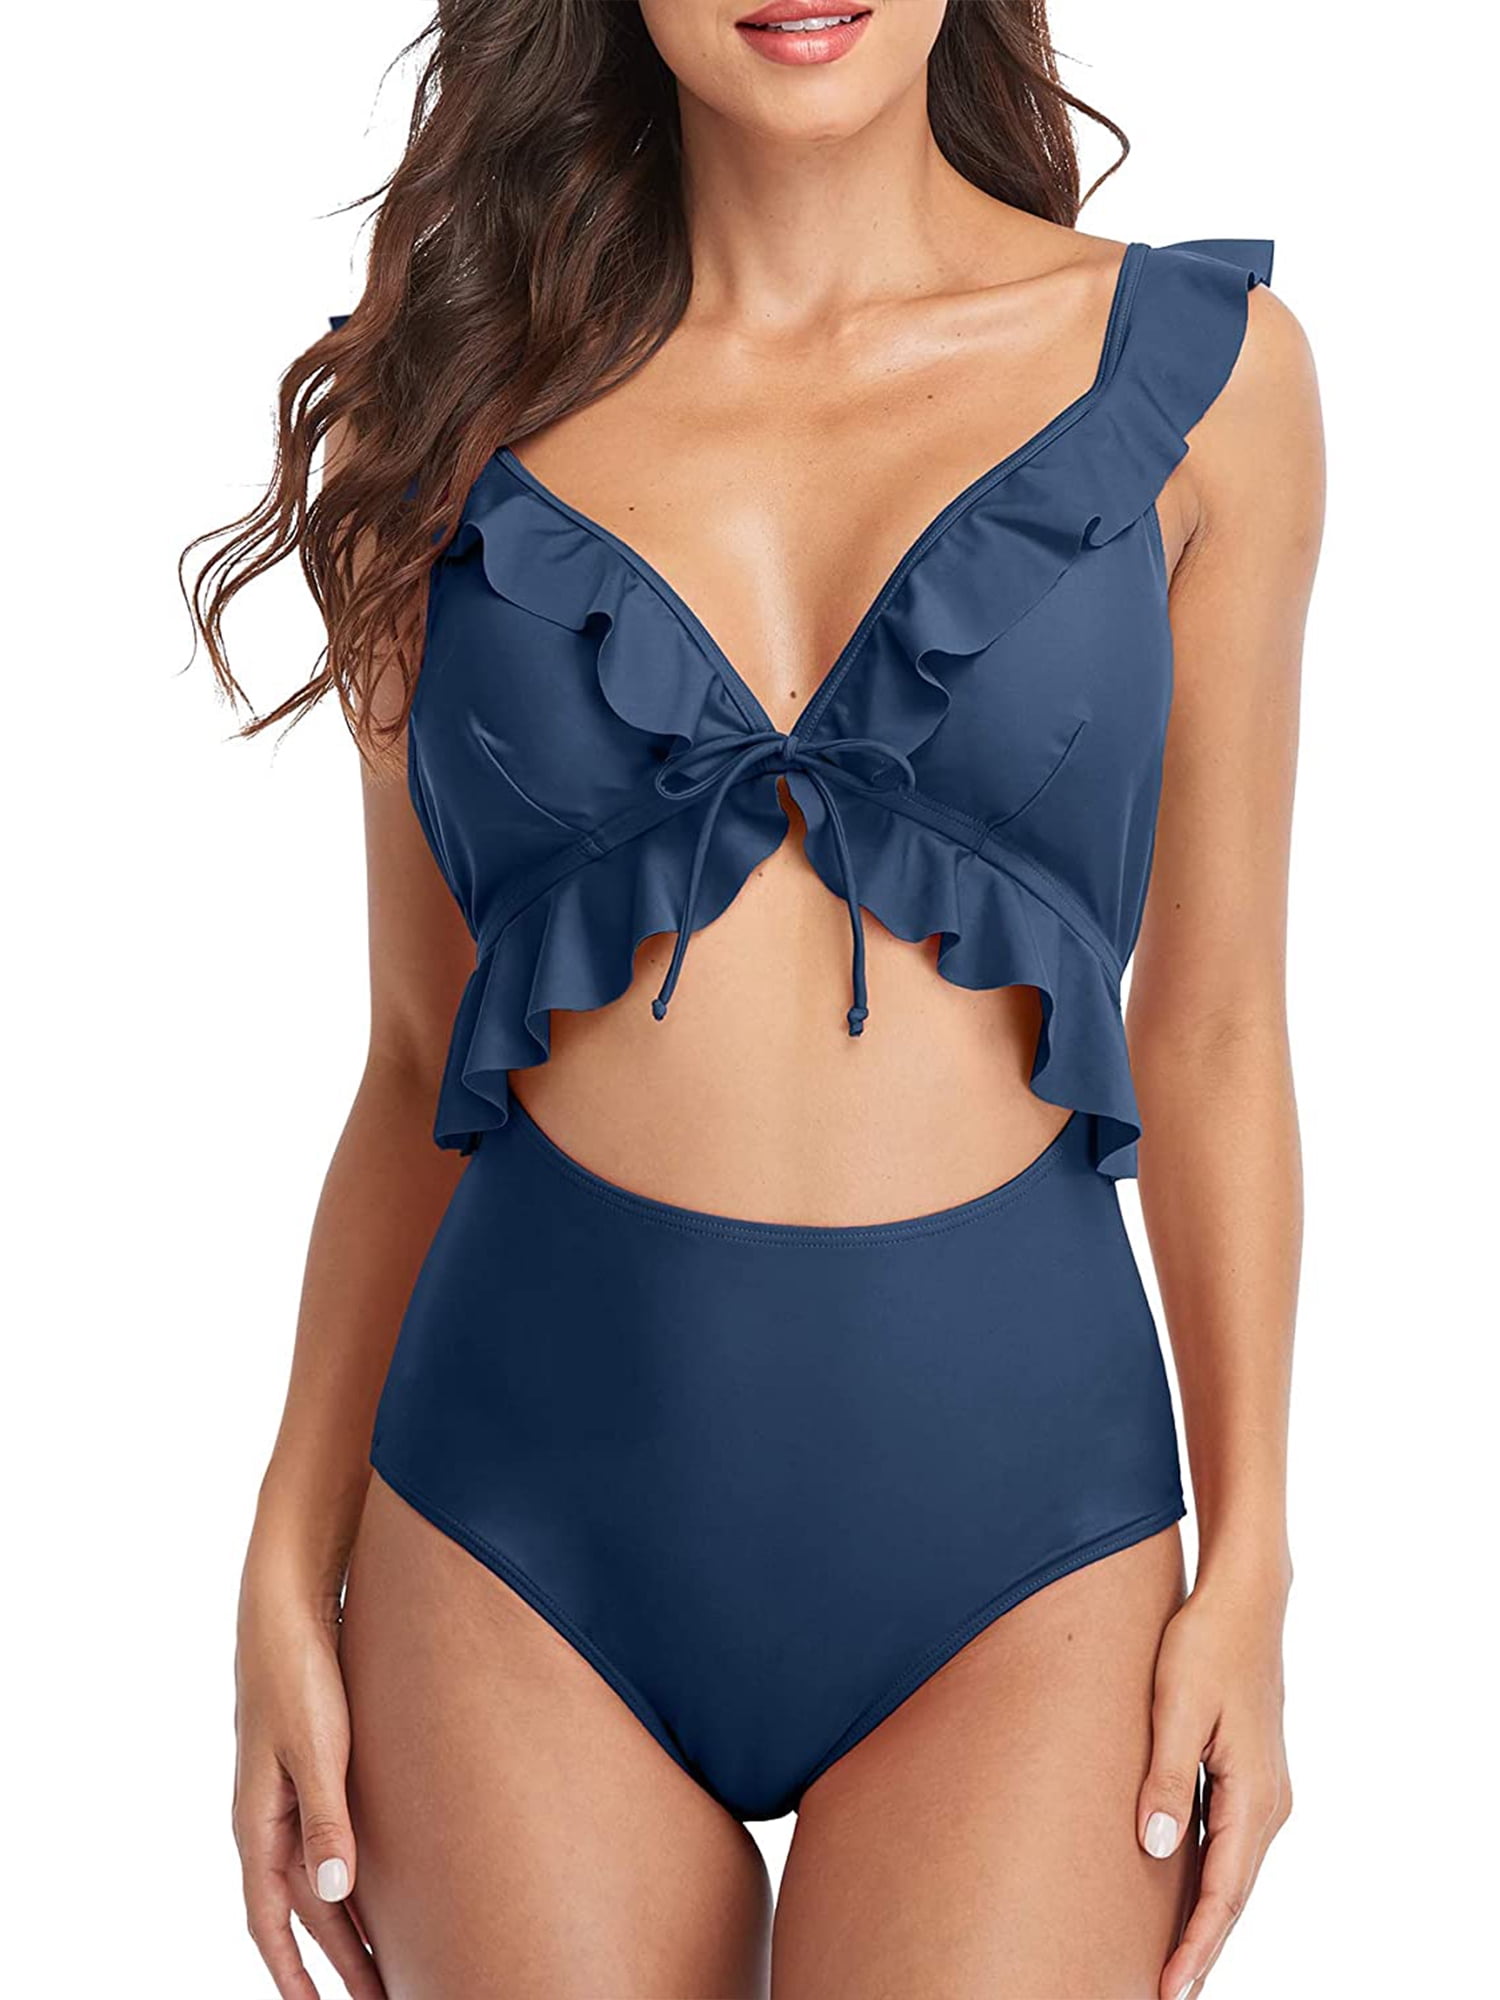 Charmo Ruffle One Piece Swimsuits for Women V Neck Ruched Monokini Bathing Suits